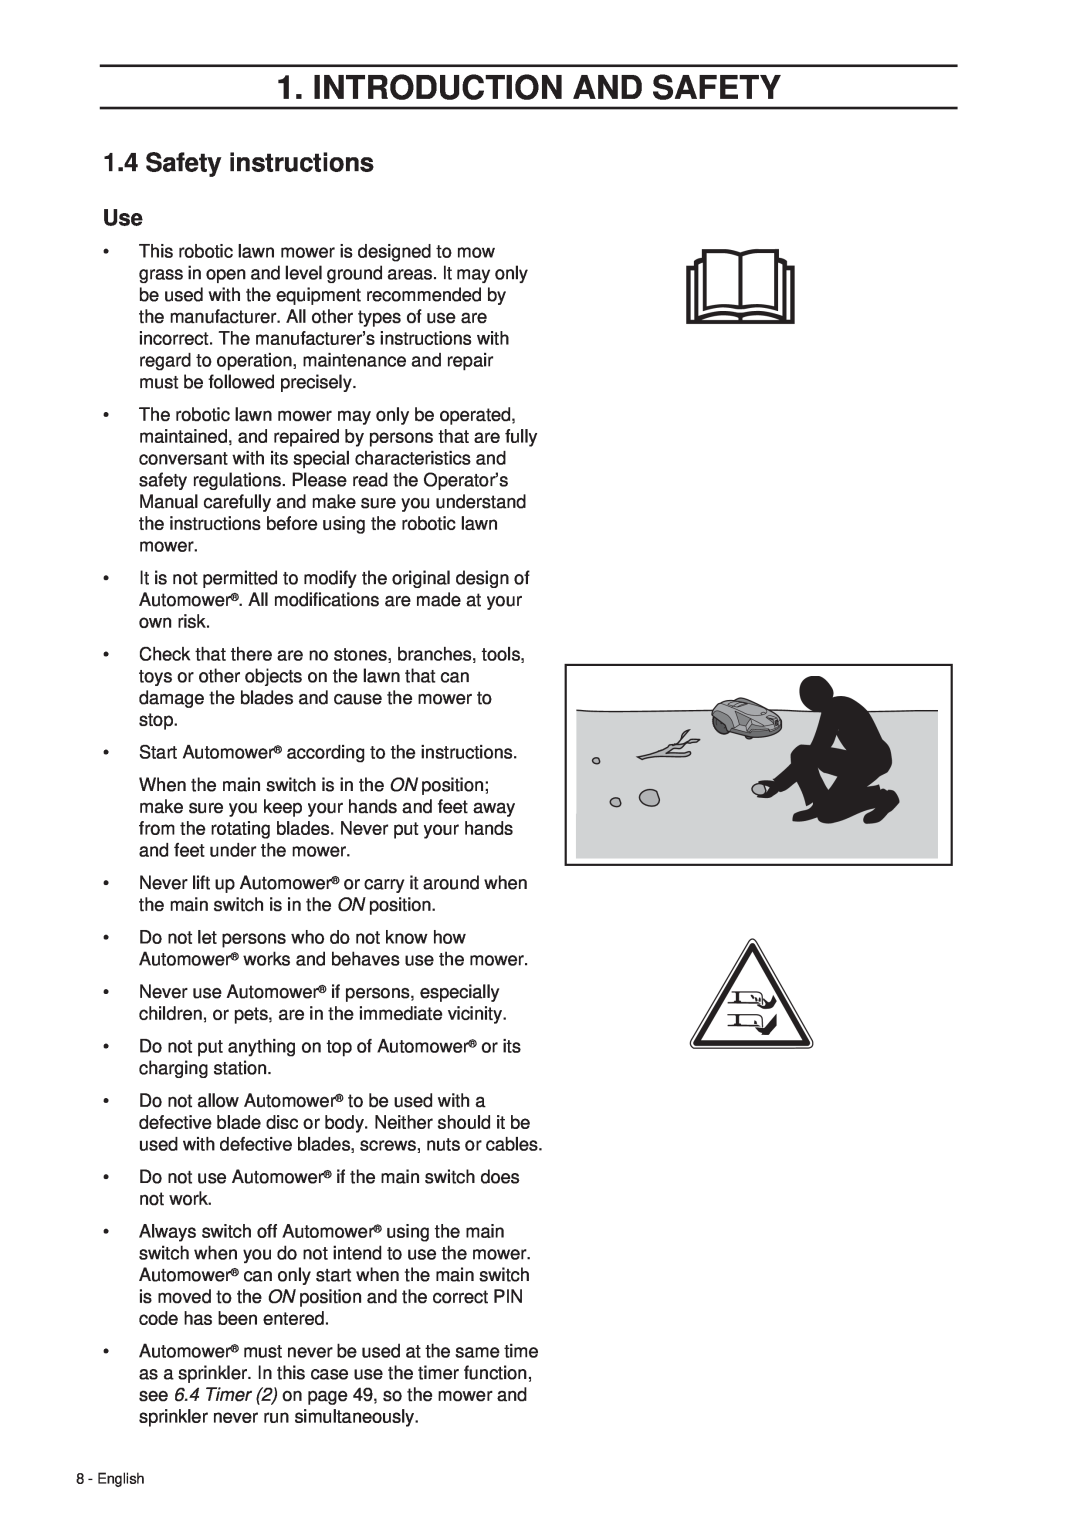 Husqvarna 265 ACX manual Safety instructions, Introduction And Safety 